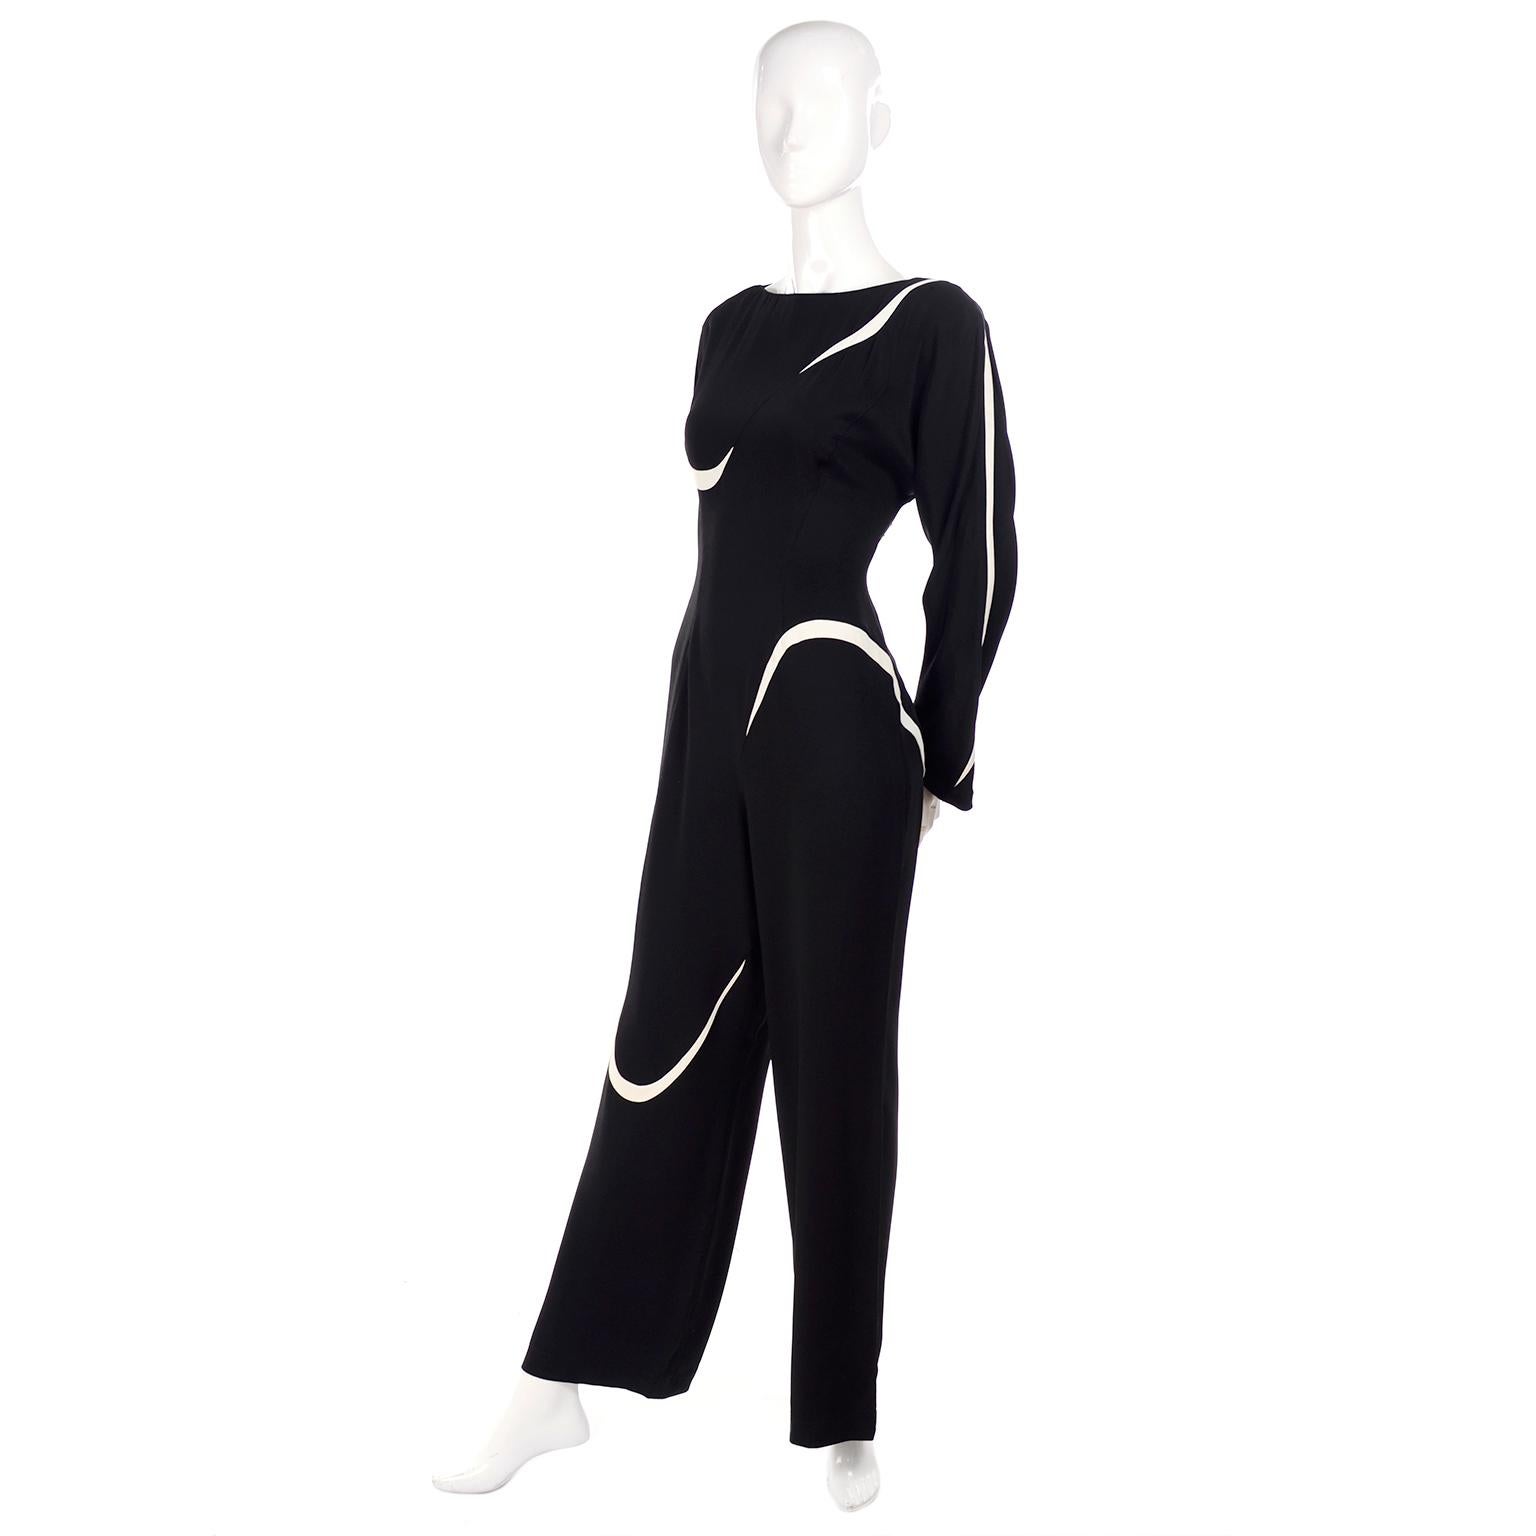 Thierry Mugler Paris Vintage Black Jumpsuit With Abstract White Swirls 3